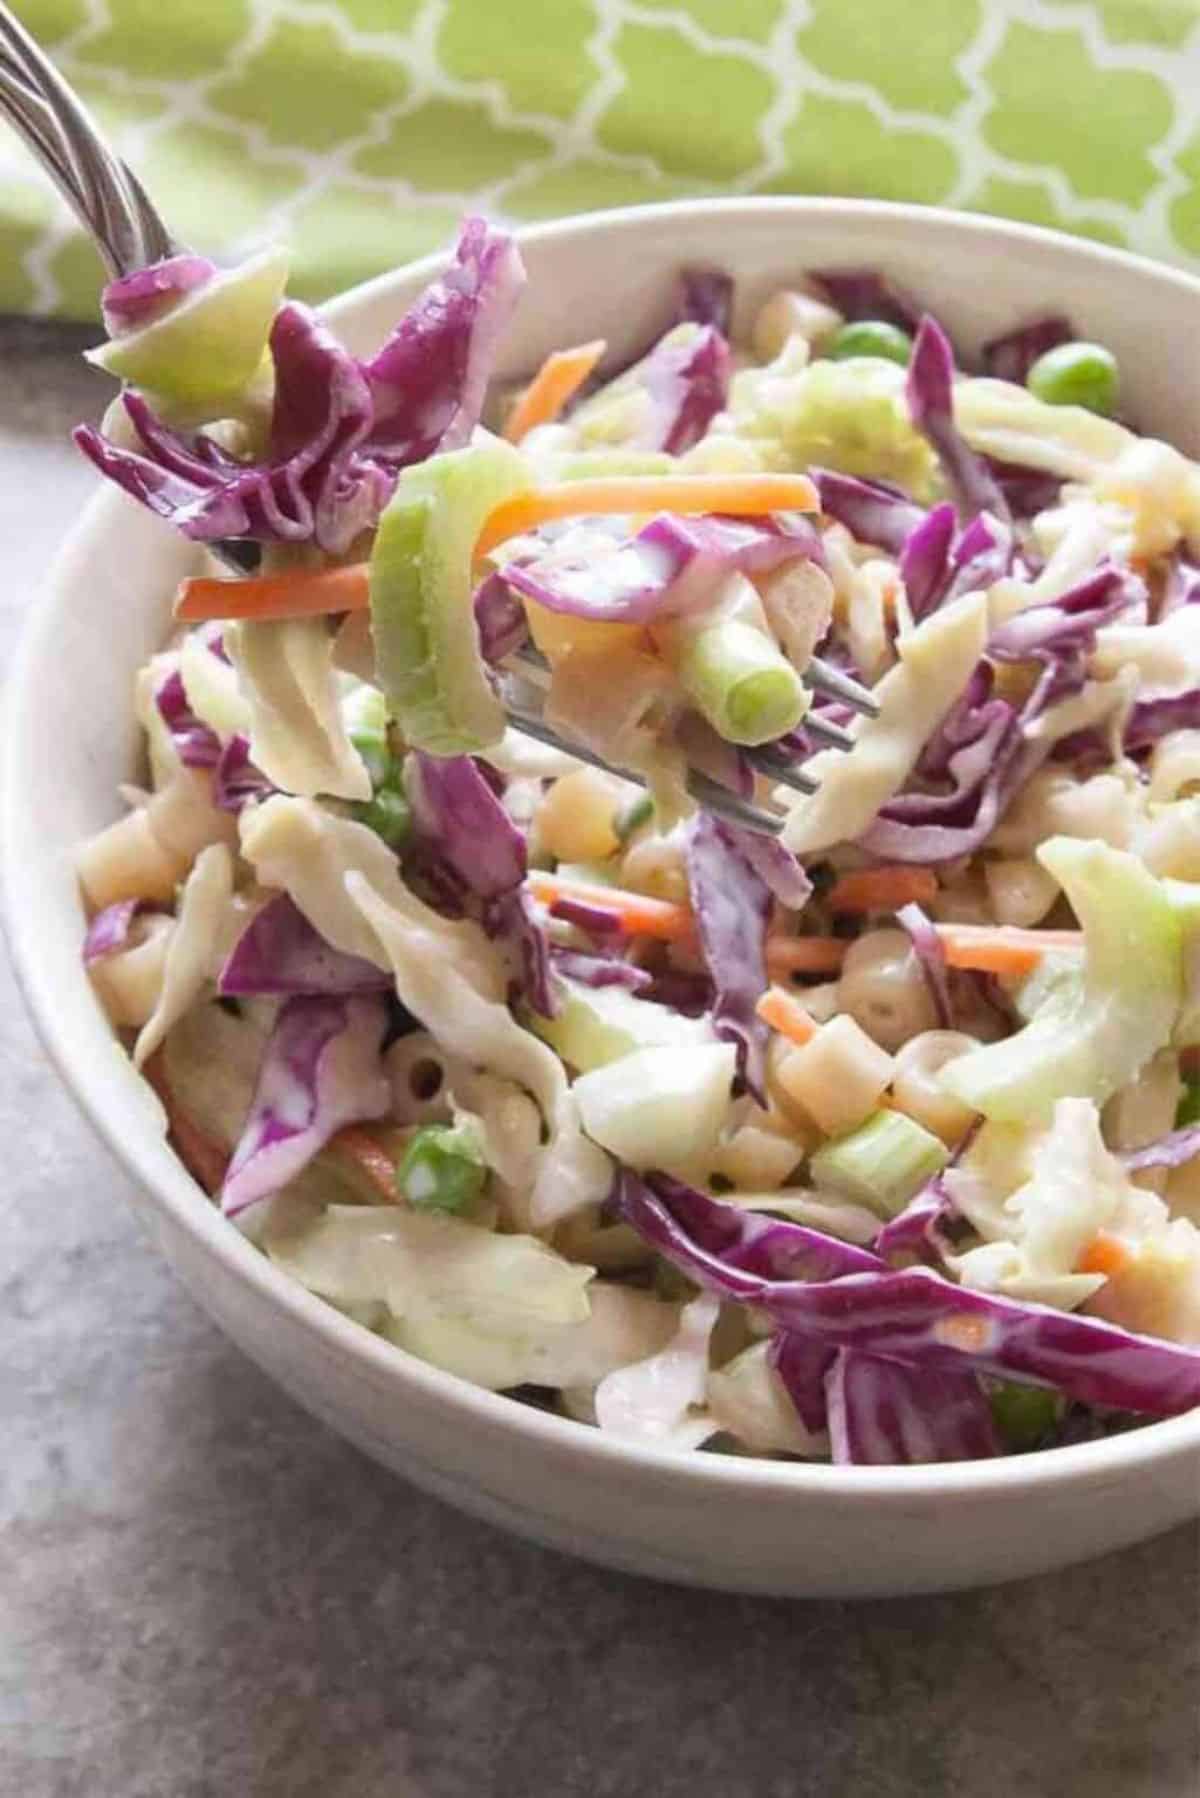 Healthy Macaroni Coleslaw Salad in a white bowl.